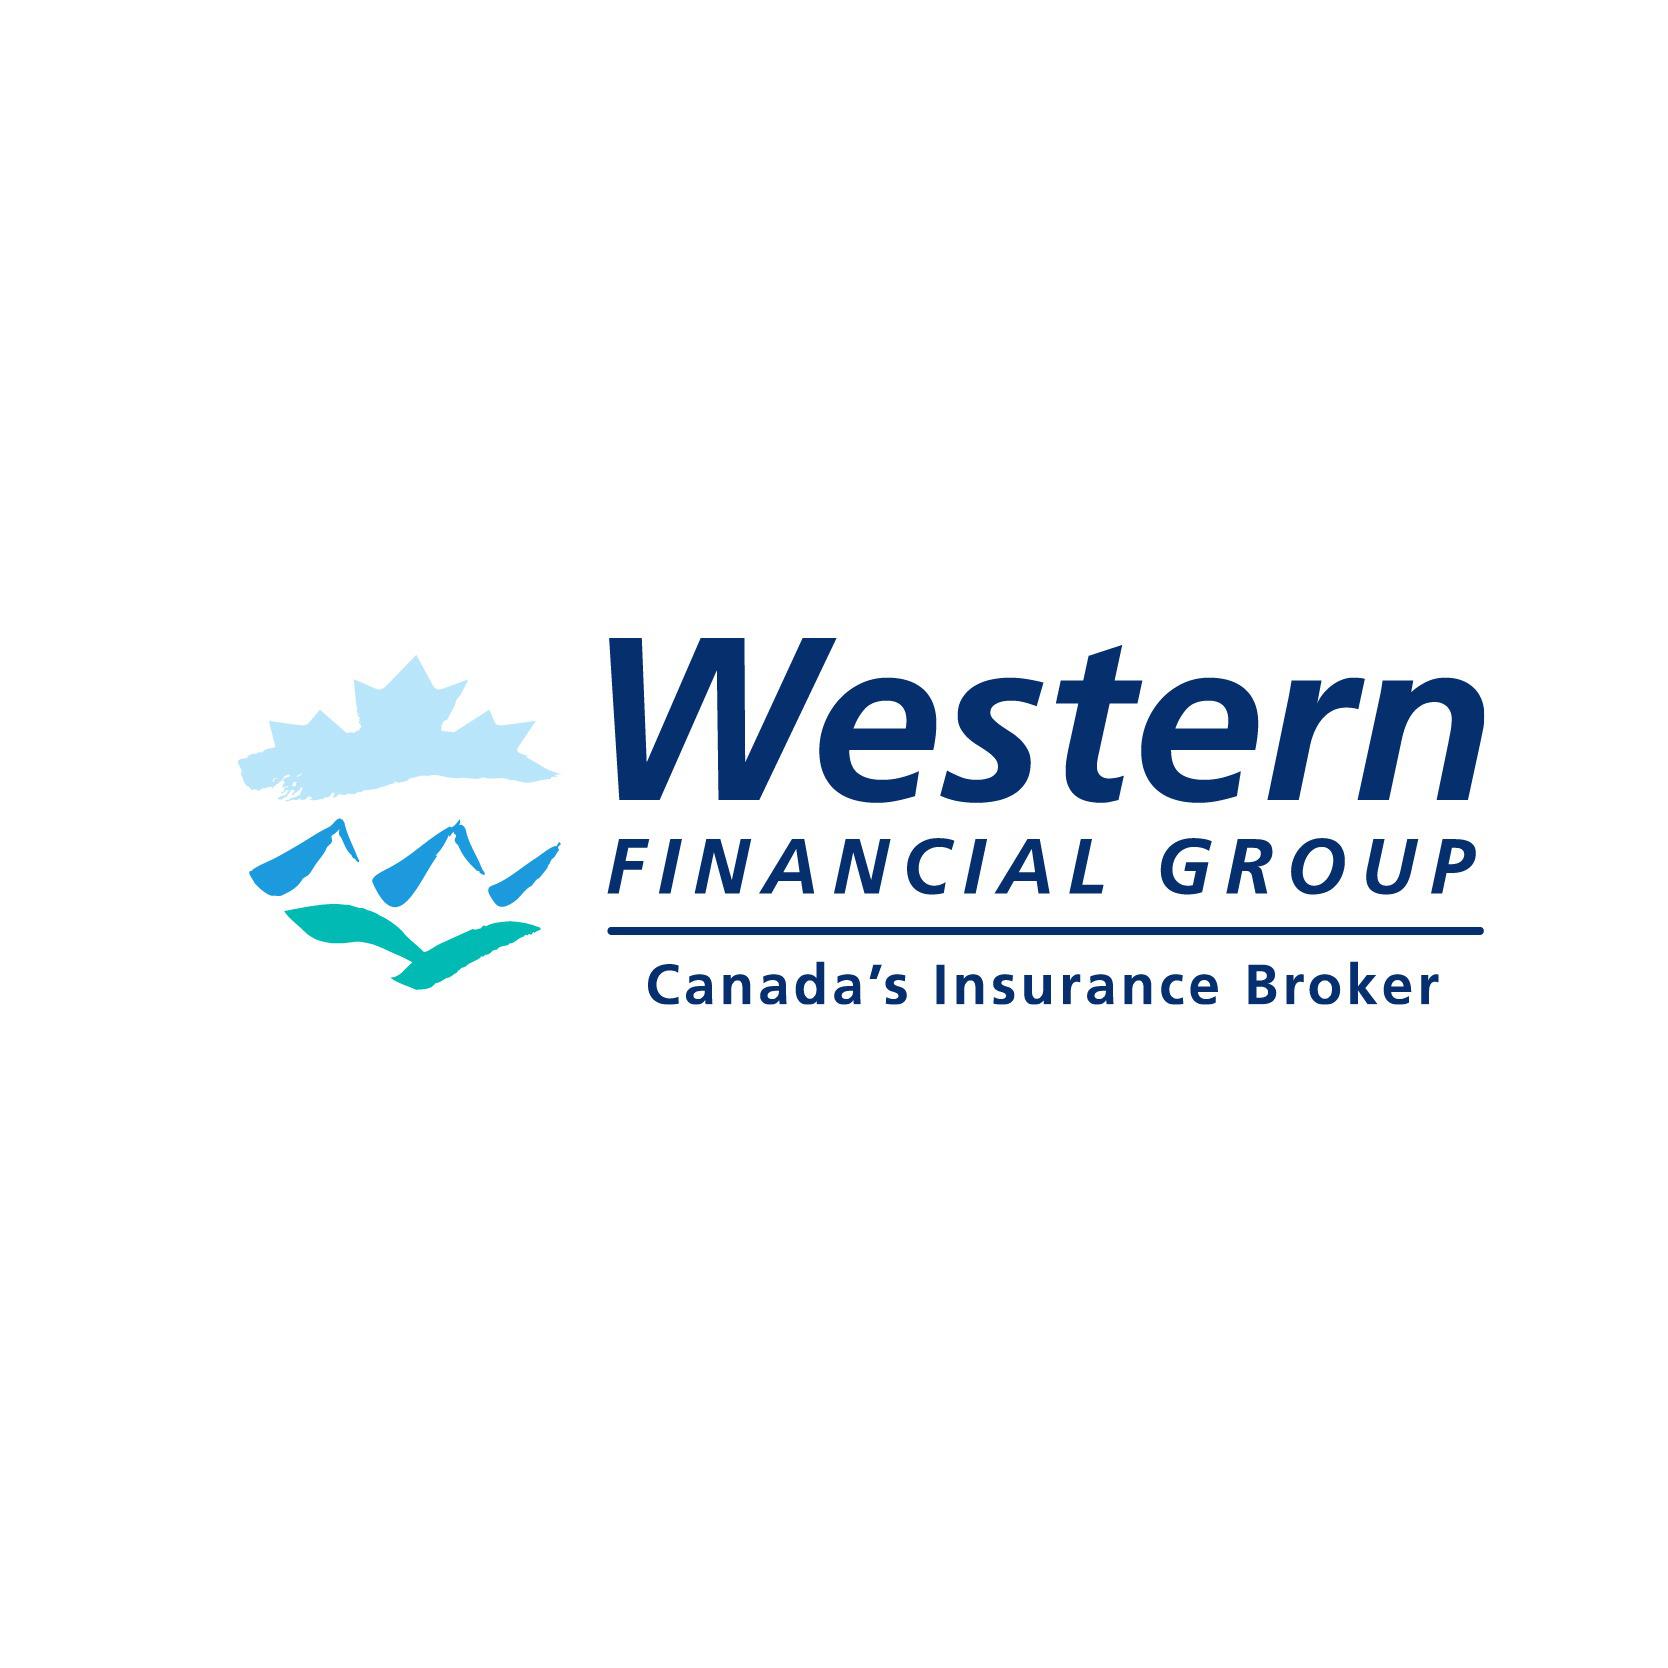 Western Financial Group Inc. - Canada's Insurance Broker 4635 Greig Ave, Terrace British Columbia V8G 5P9